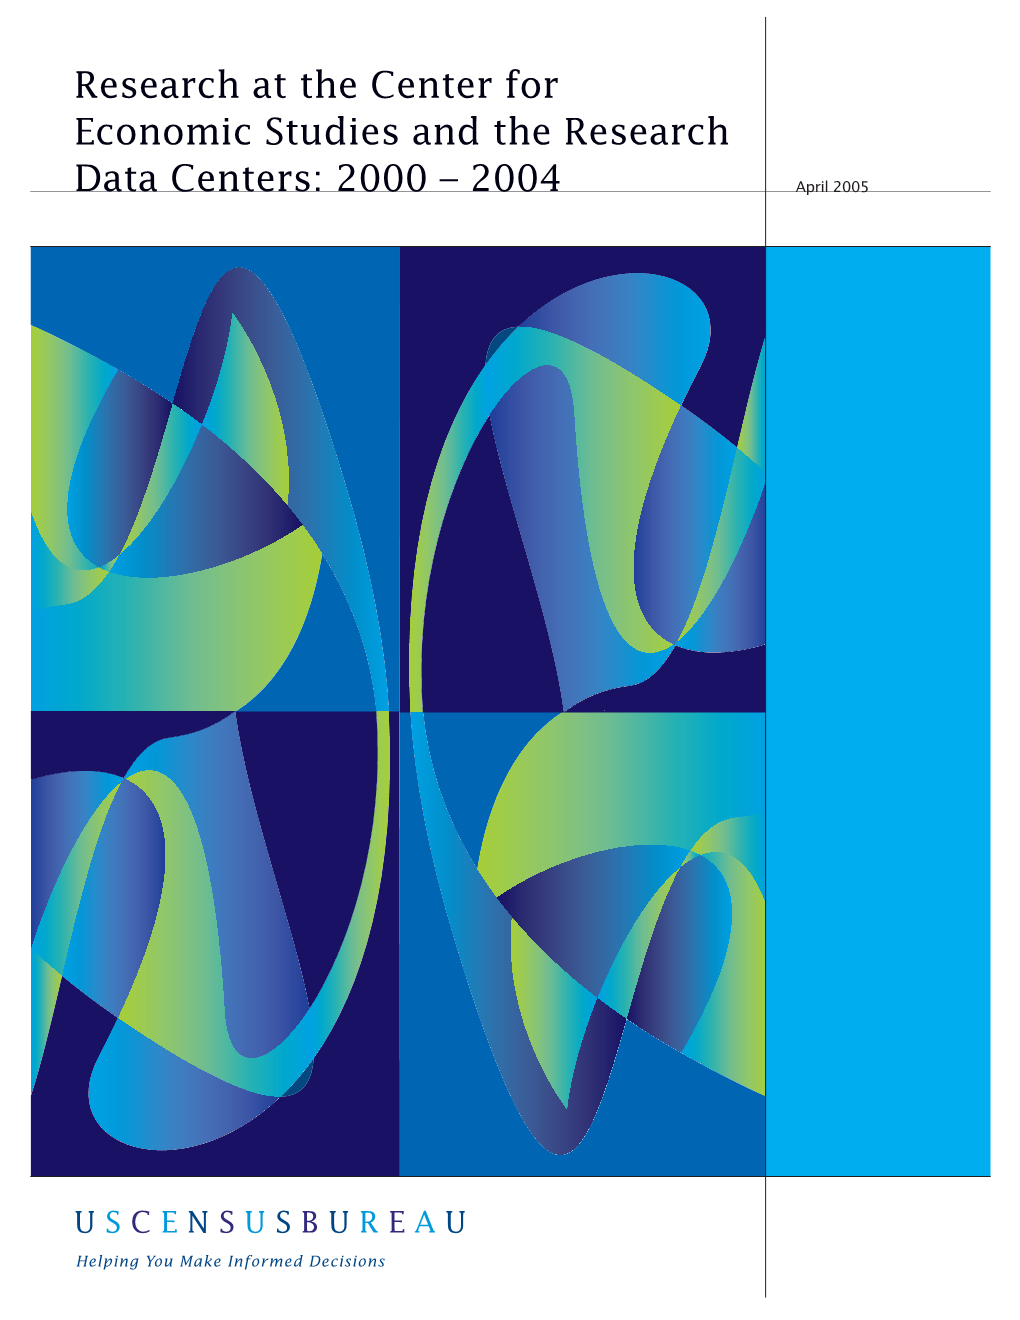 Research at the Center for Economic Studies and the Research Data Centers: 2000 - 2004